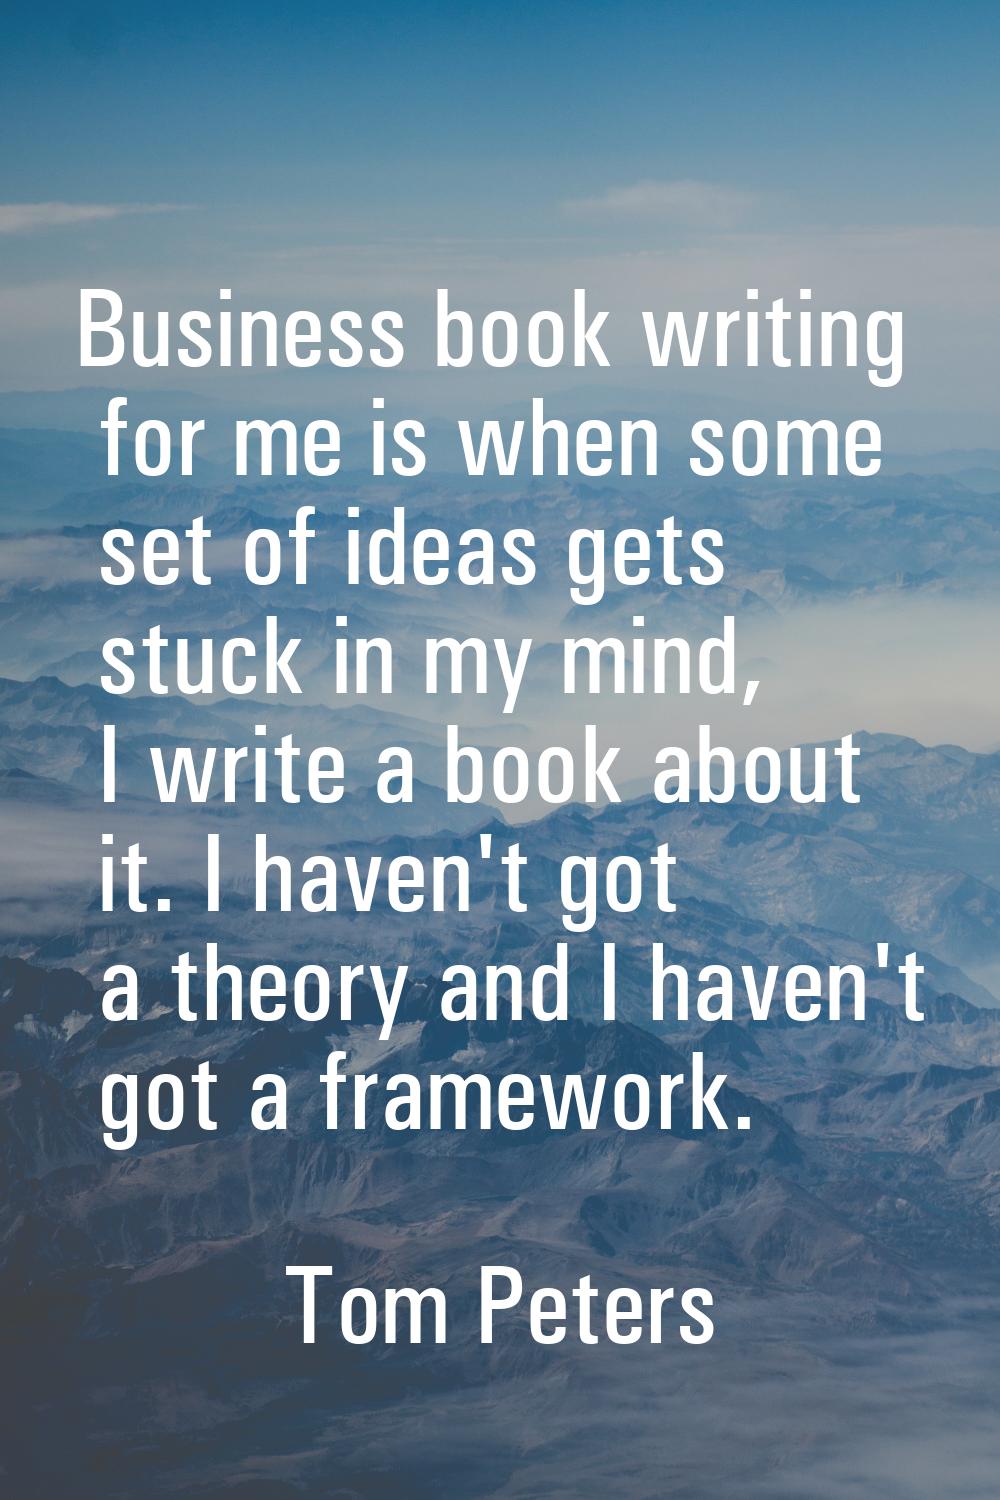 Business book writing for me is when some set of ideas gets stuck in my mind, I write a book about 